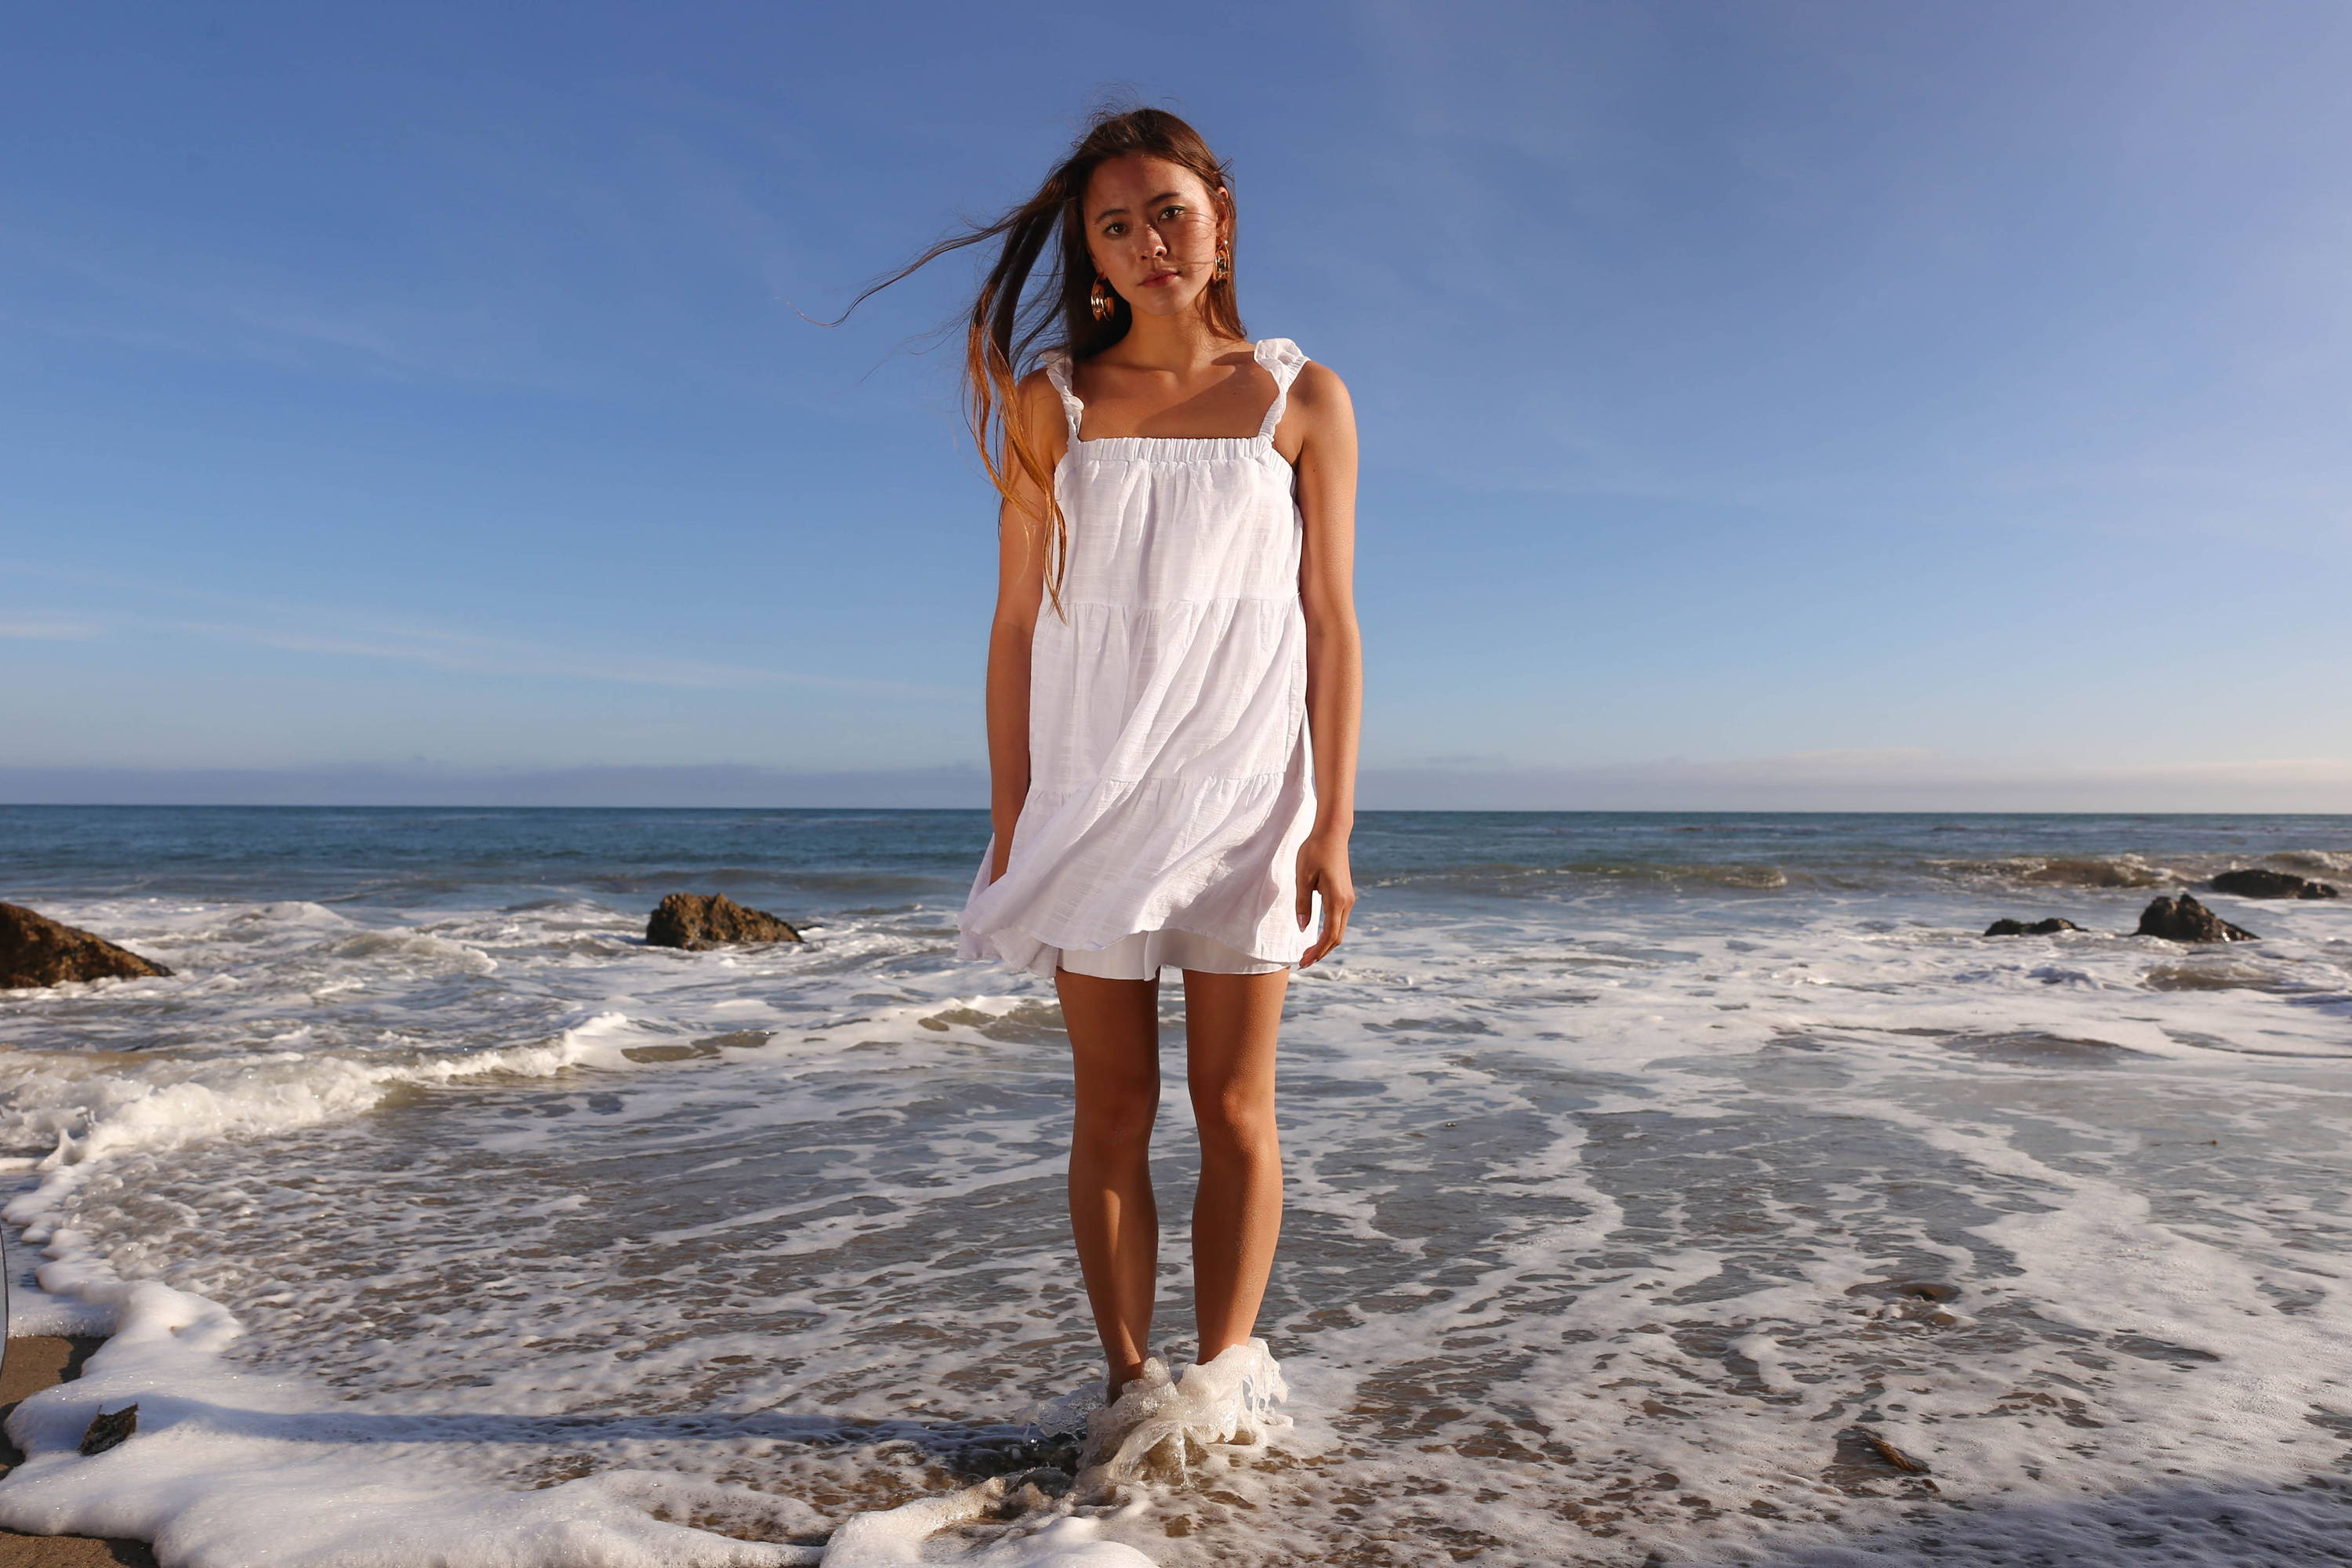 Trixxi Las Fotos Class C.E.O project photoshoot, girl standing in beach ocean water with white shoulder tie tiered short dress on.